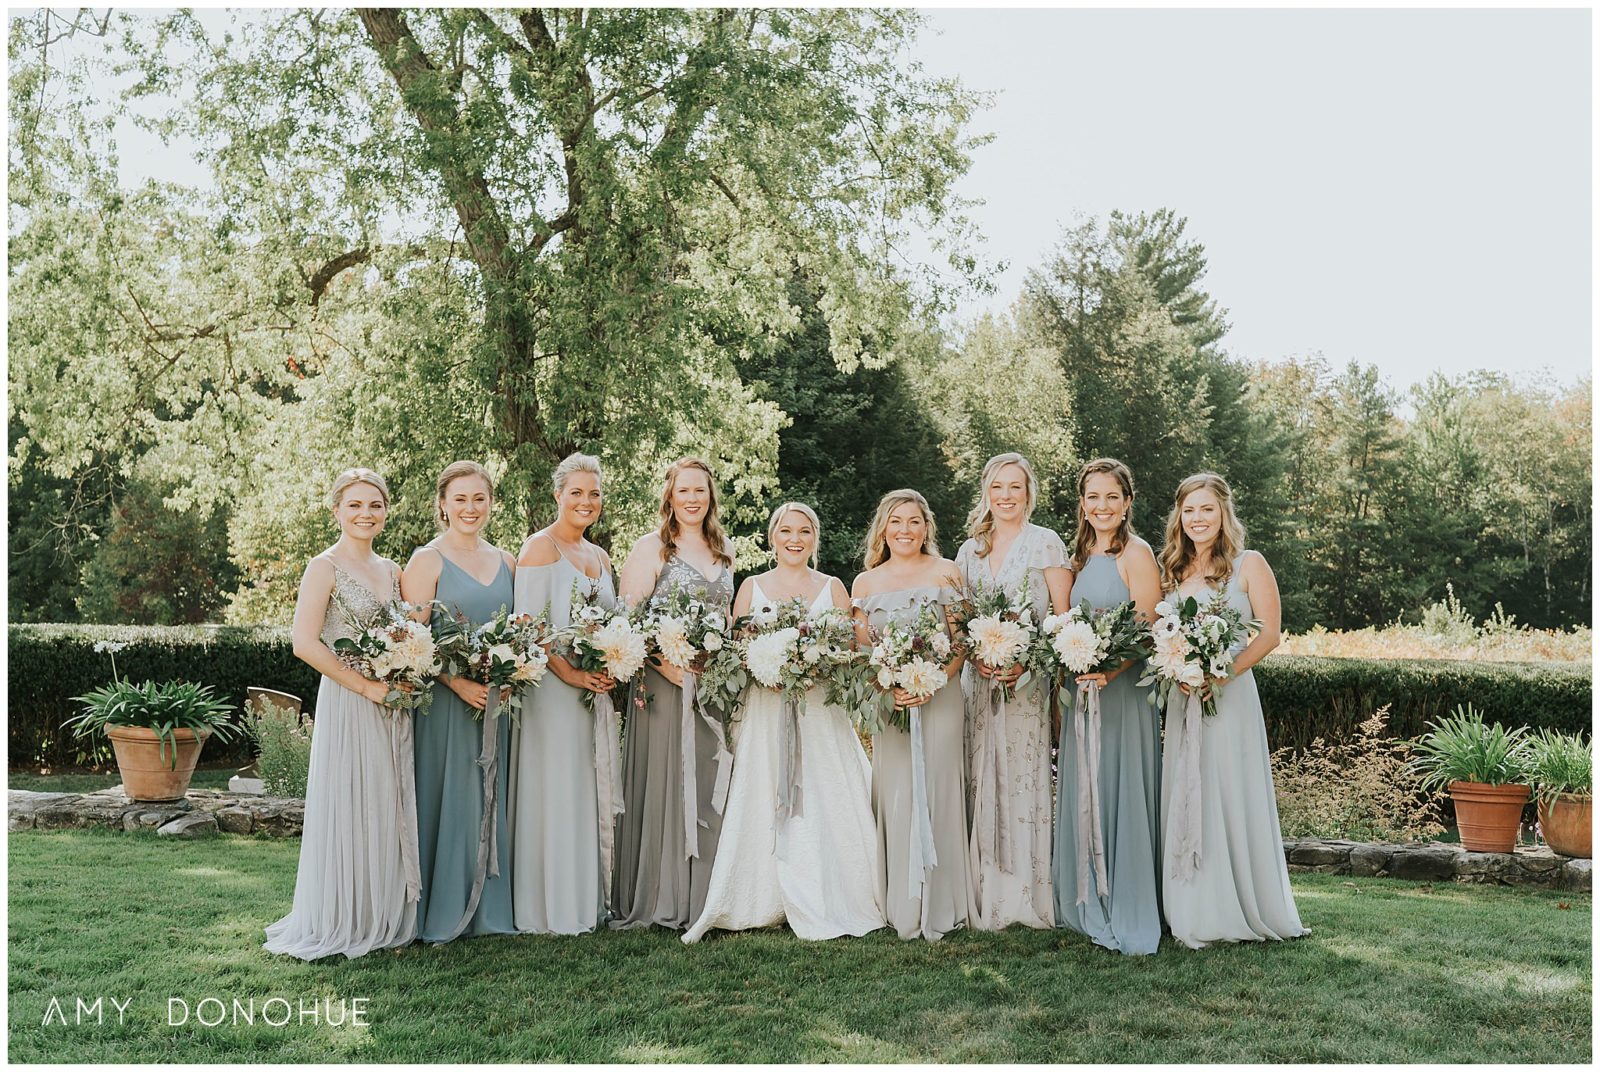 Dale & Mike | The Fells Estate & Gardens Wedding | New Hampshire ...